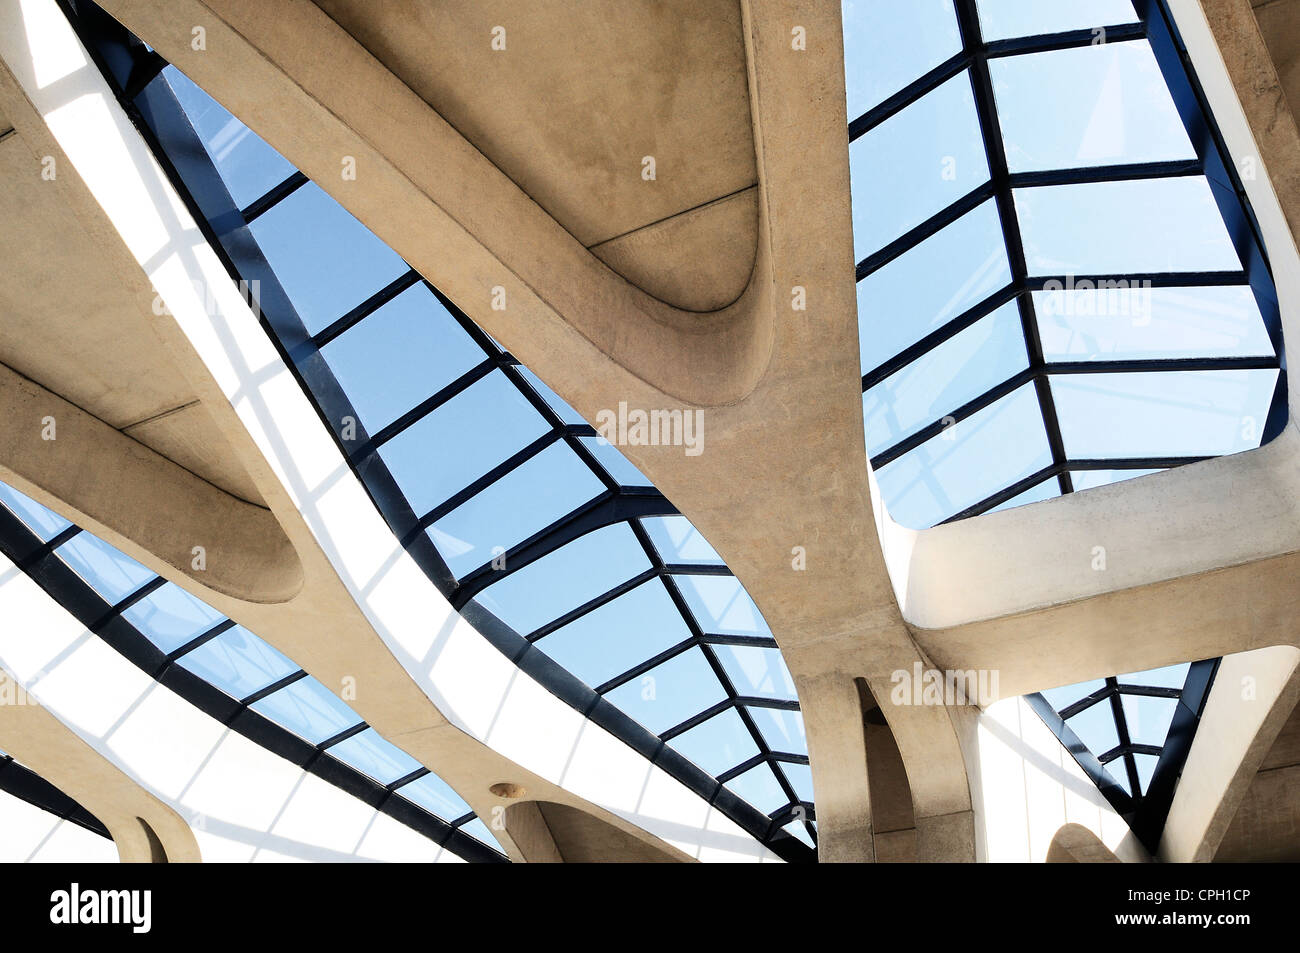 Contemporany roof, architecture detail Stock Photo